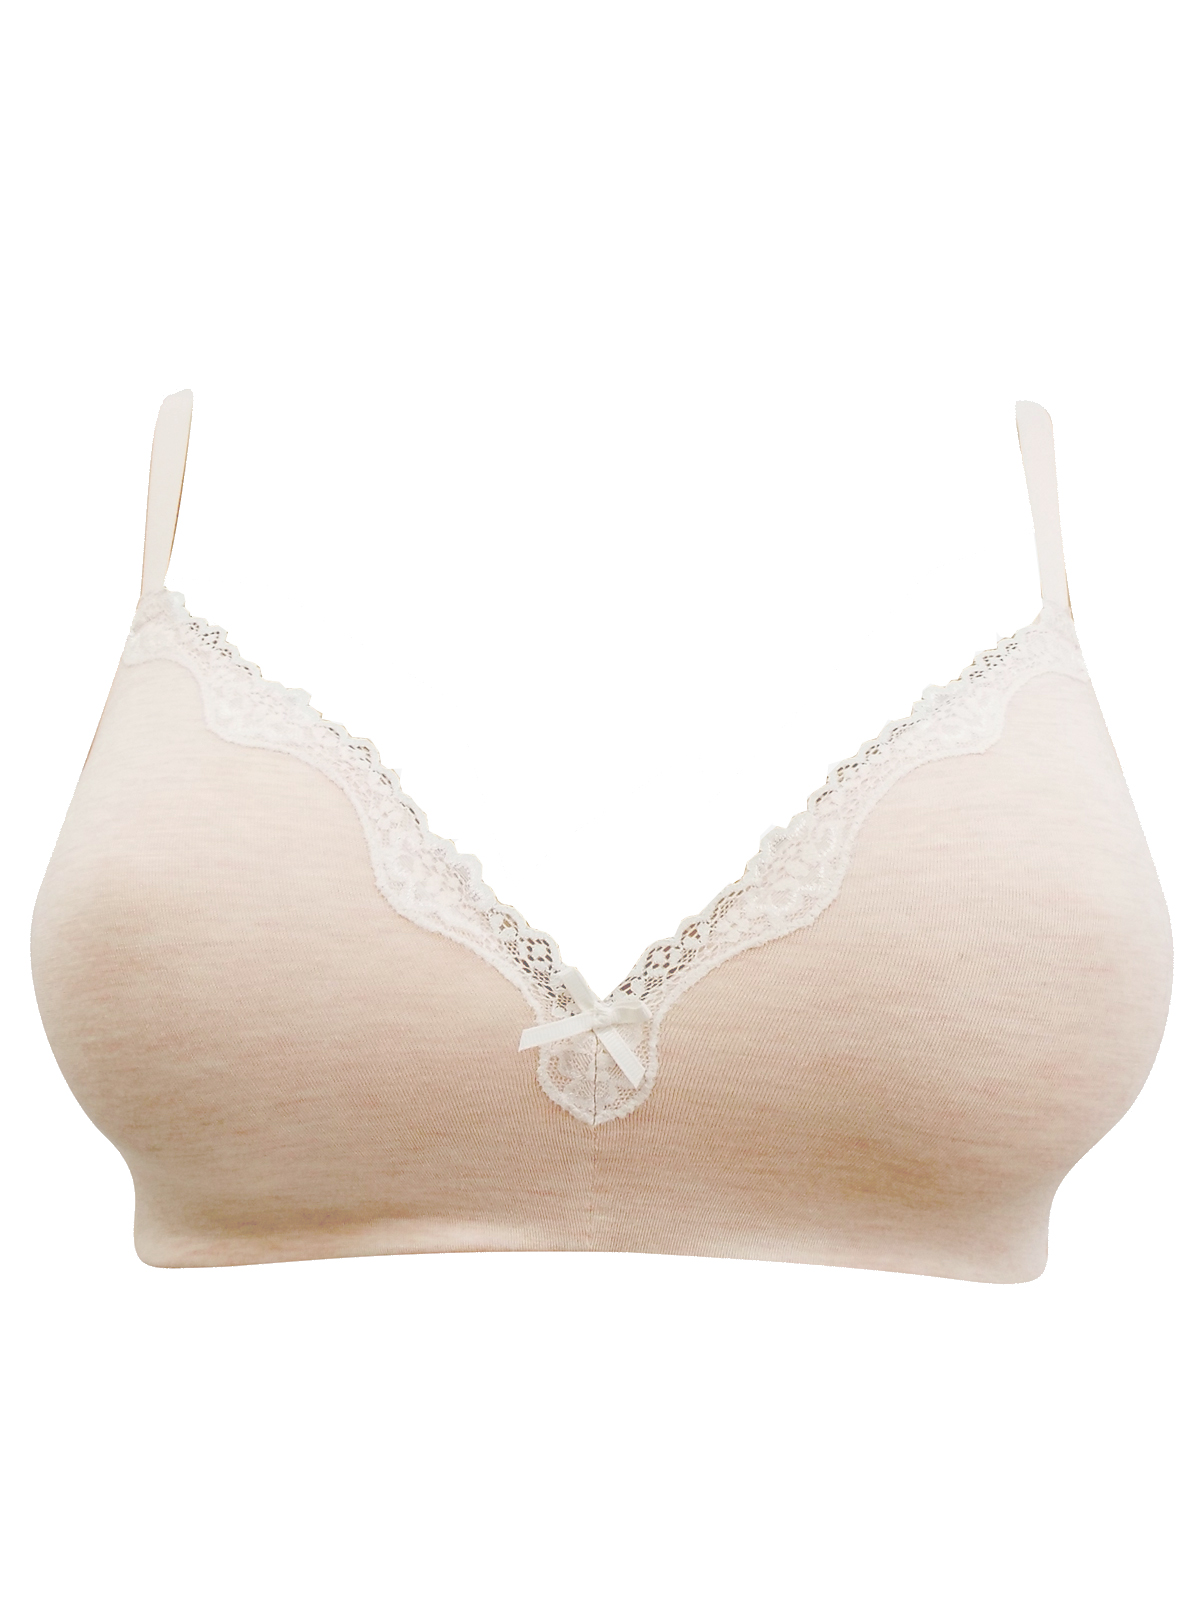 F&F - - F&F PINK-MARL Modal Blend Smoothing Moulded Full Cup Bra - Size 32  to 38 (B-C-D)